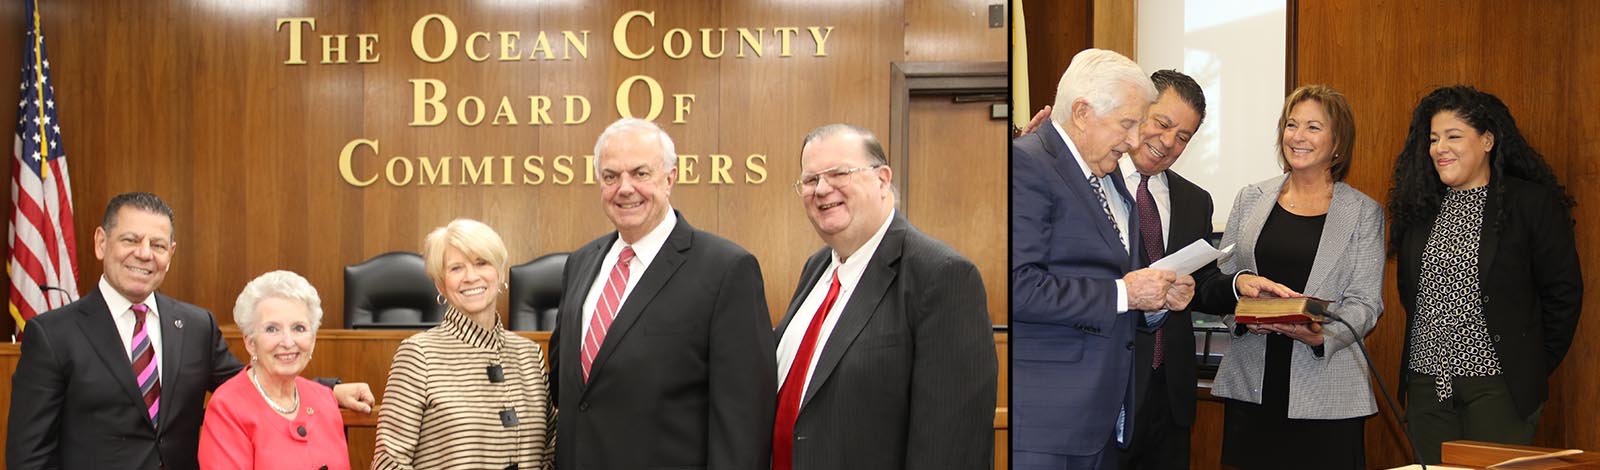 Meet our Ocean County Commissioners